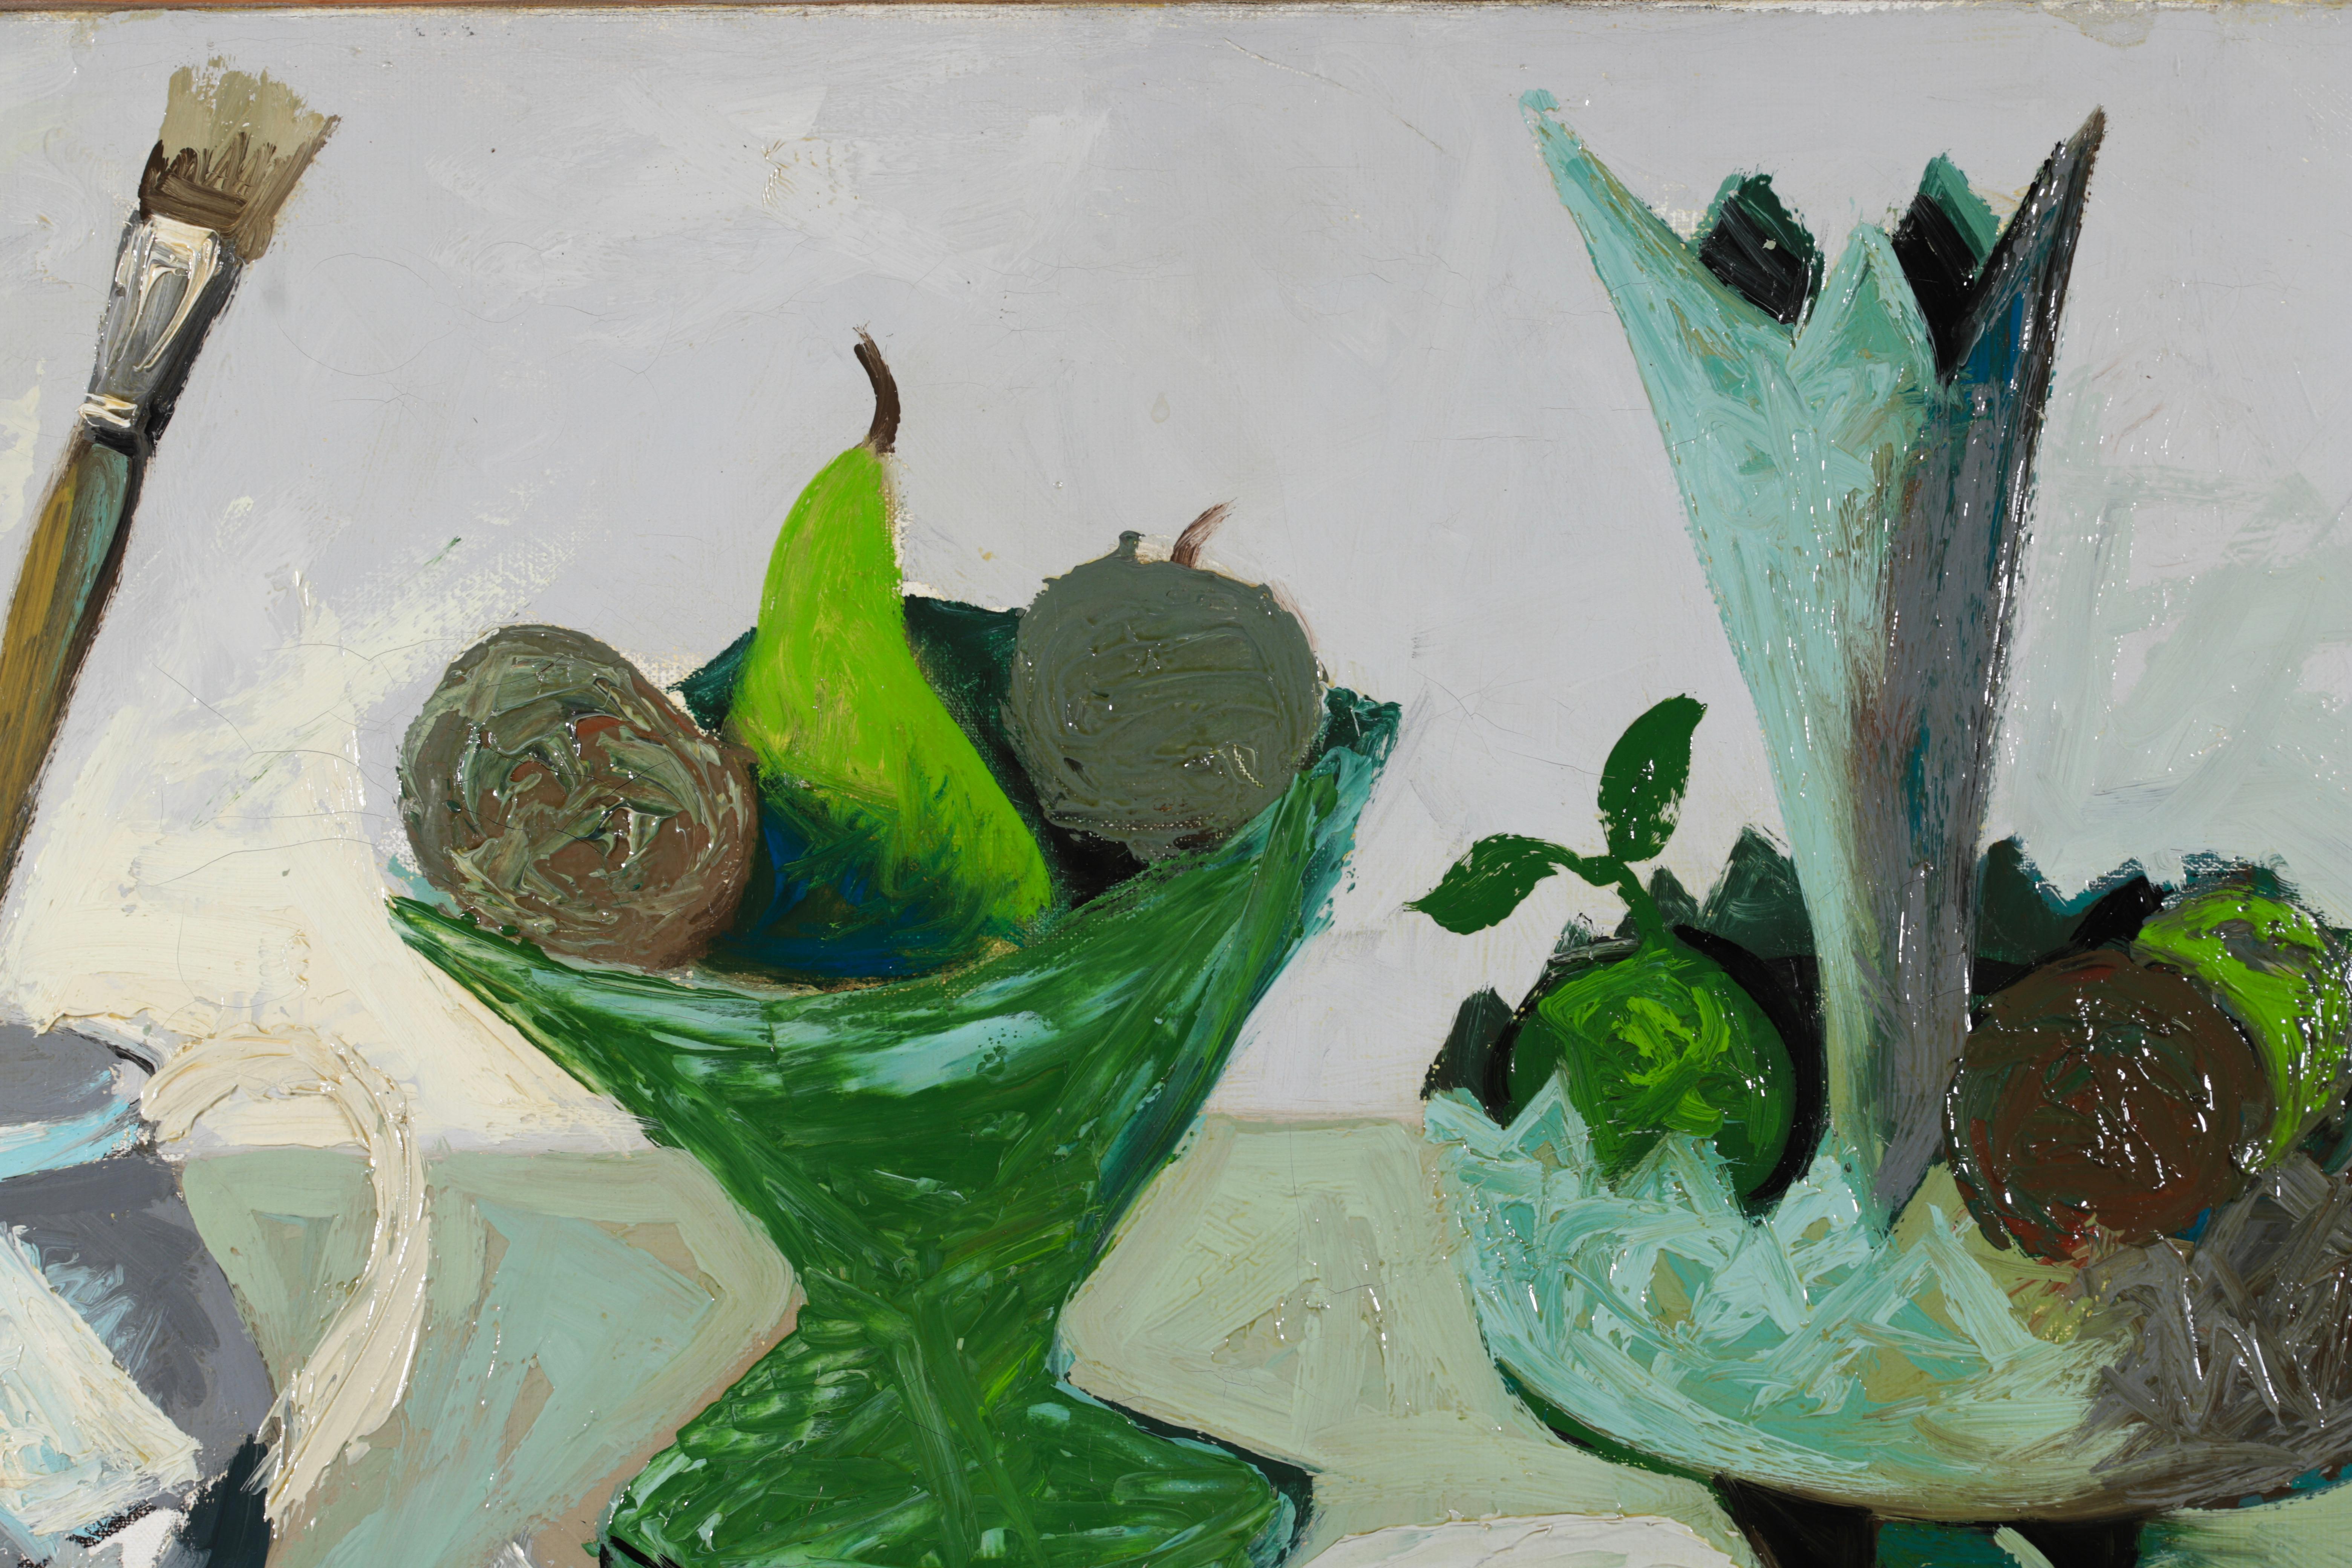 Signed post-cubist oil on canvas circa 1950 by French painter Claude Venard. The piece, painted predominantly in green and grey tones depicts various items placed on a table - a vase with a paintbrush in it, fruit bowls filled with pears and apples,